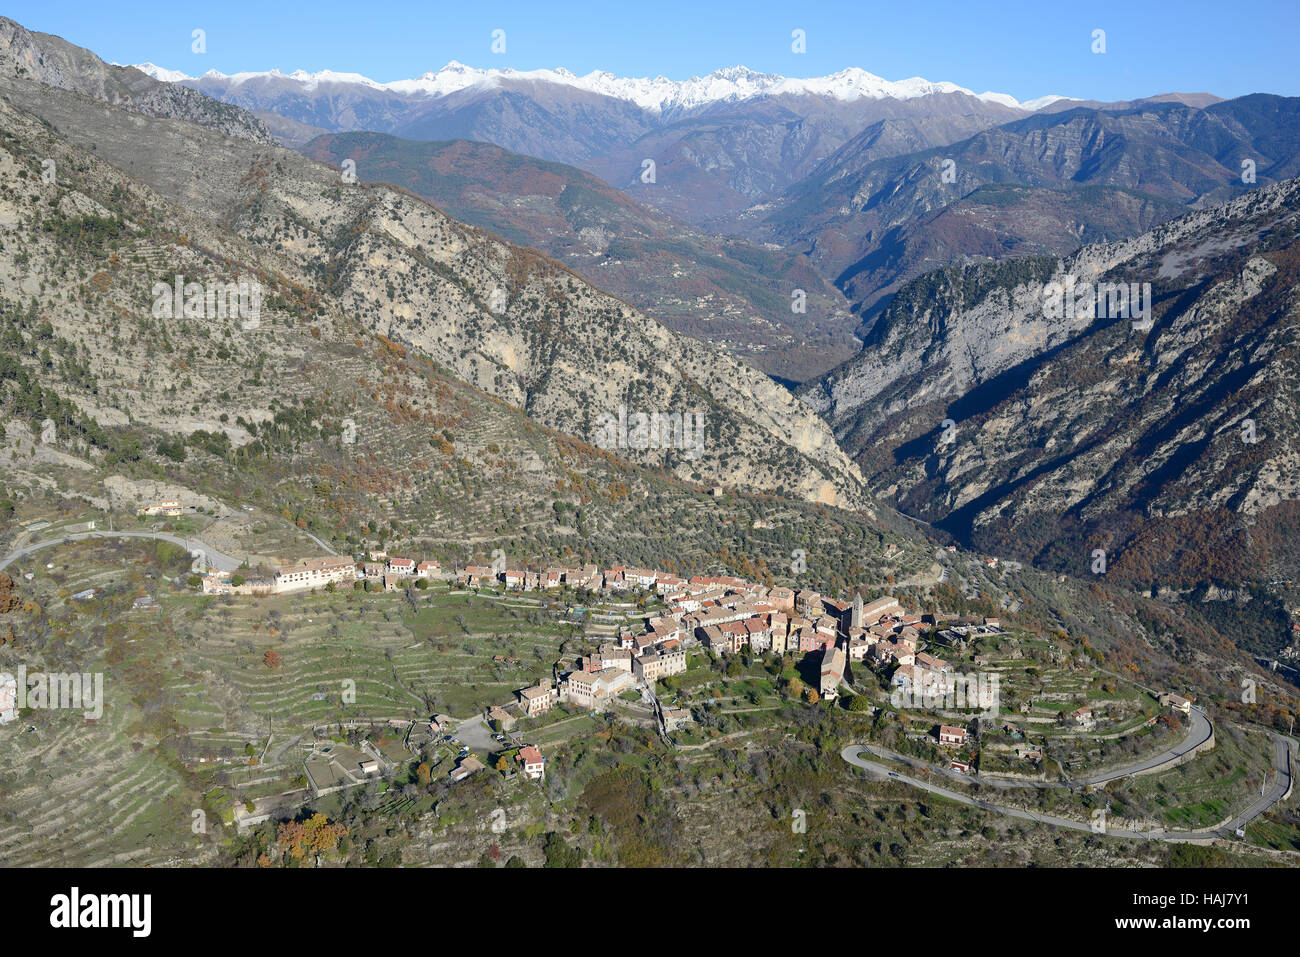 AERIAL VIEW. Hilltop village overlooking the Vésubie Valley with the snowcapped Mercantour Alps in the distance. Utelle, Alpes-Maritimes, France. Stock Photo